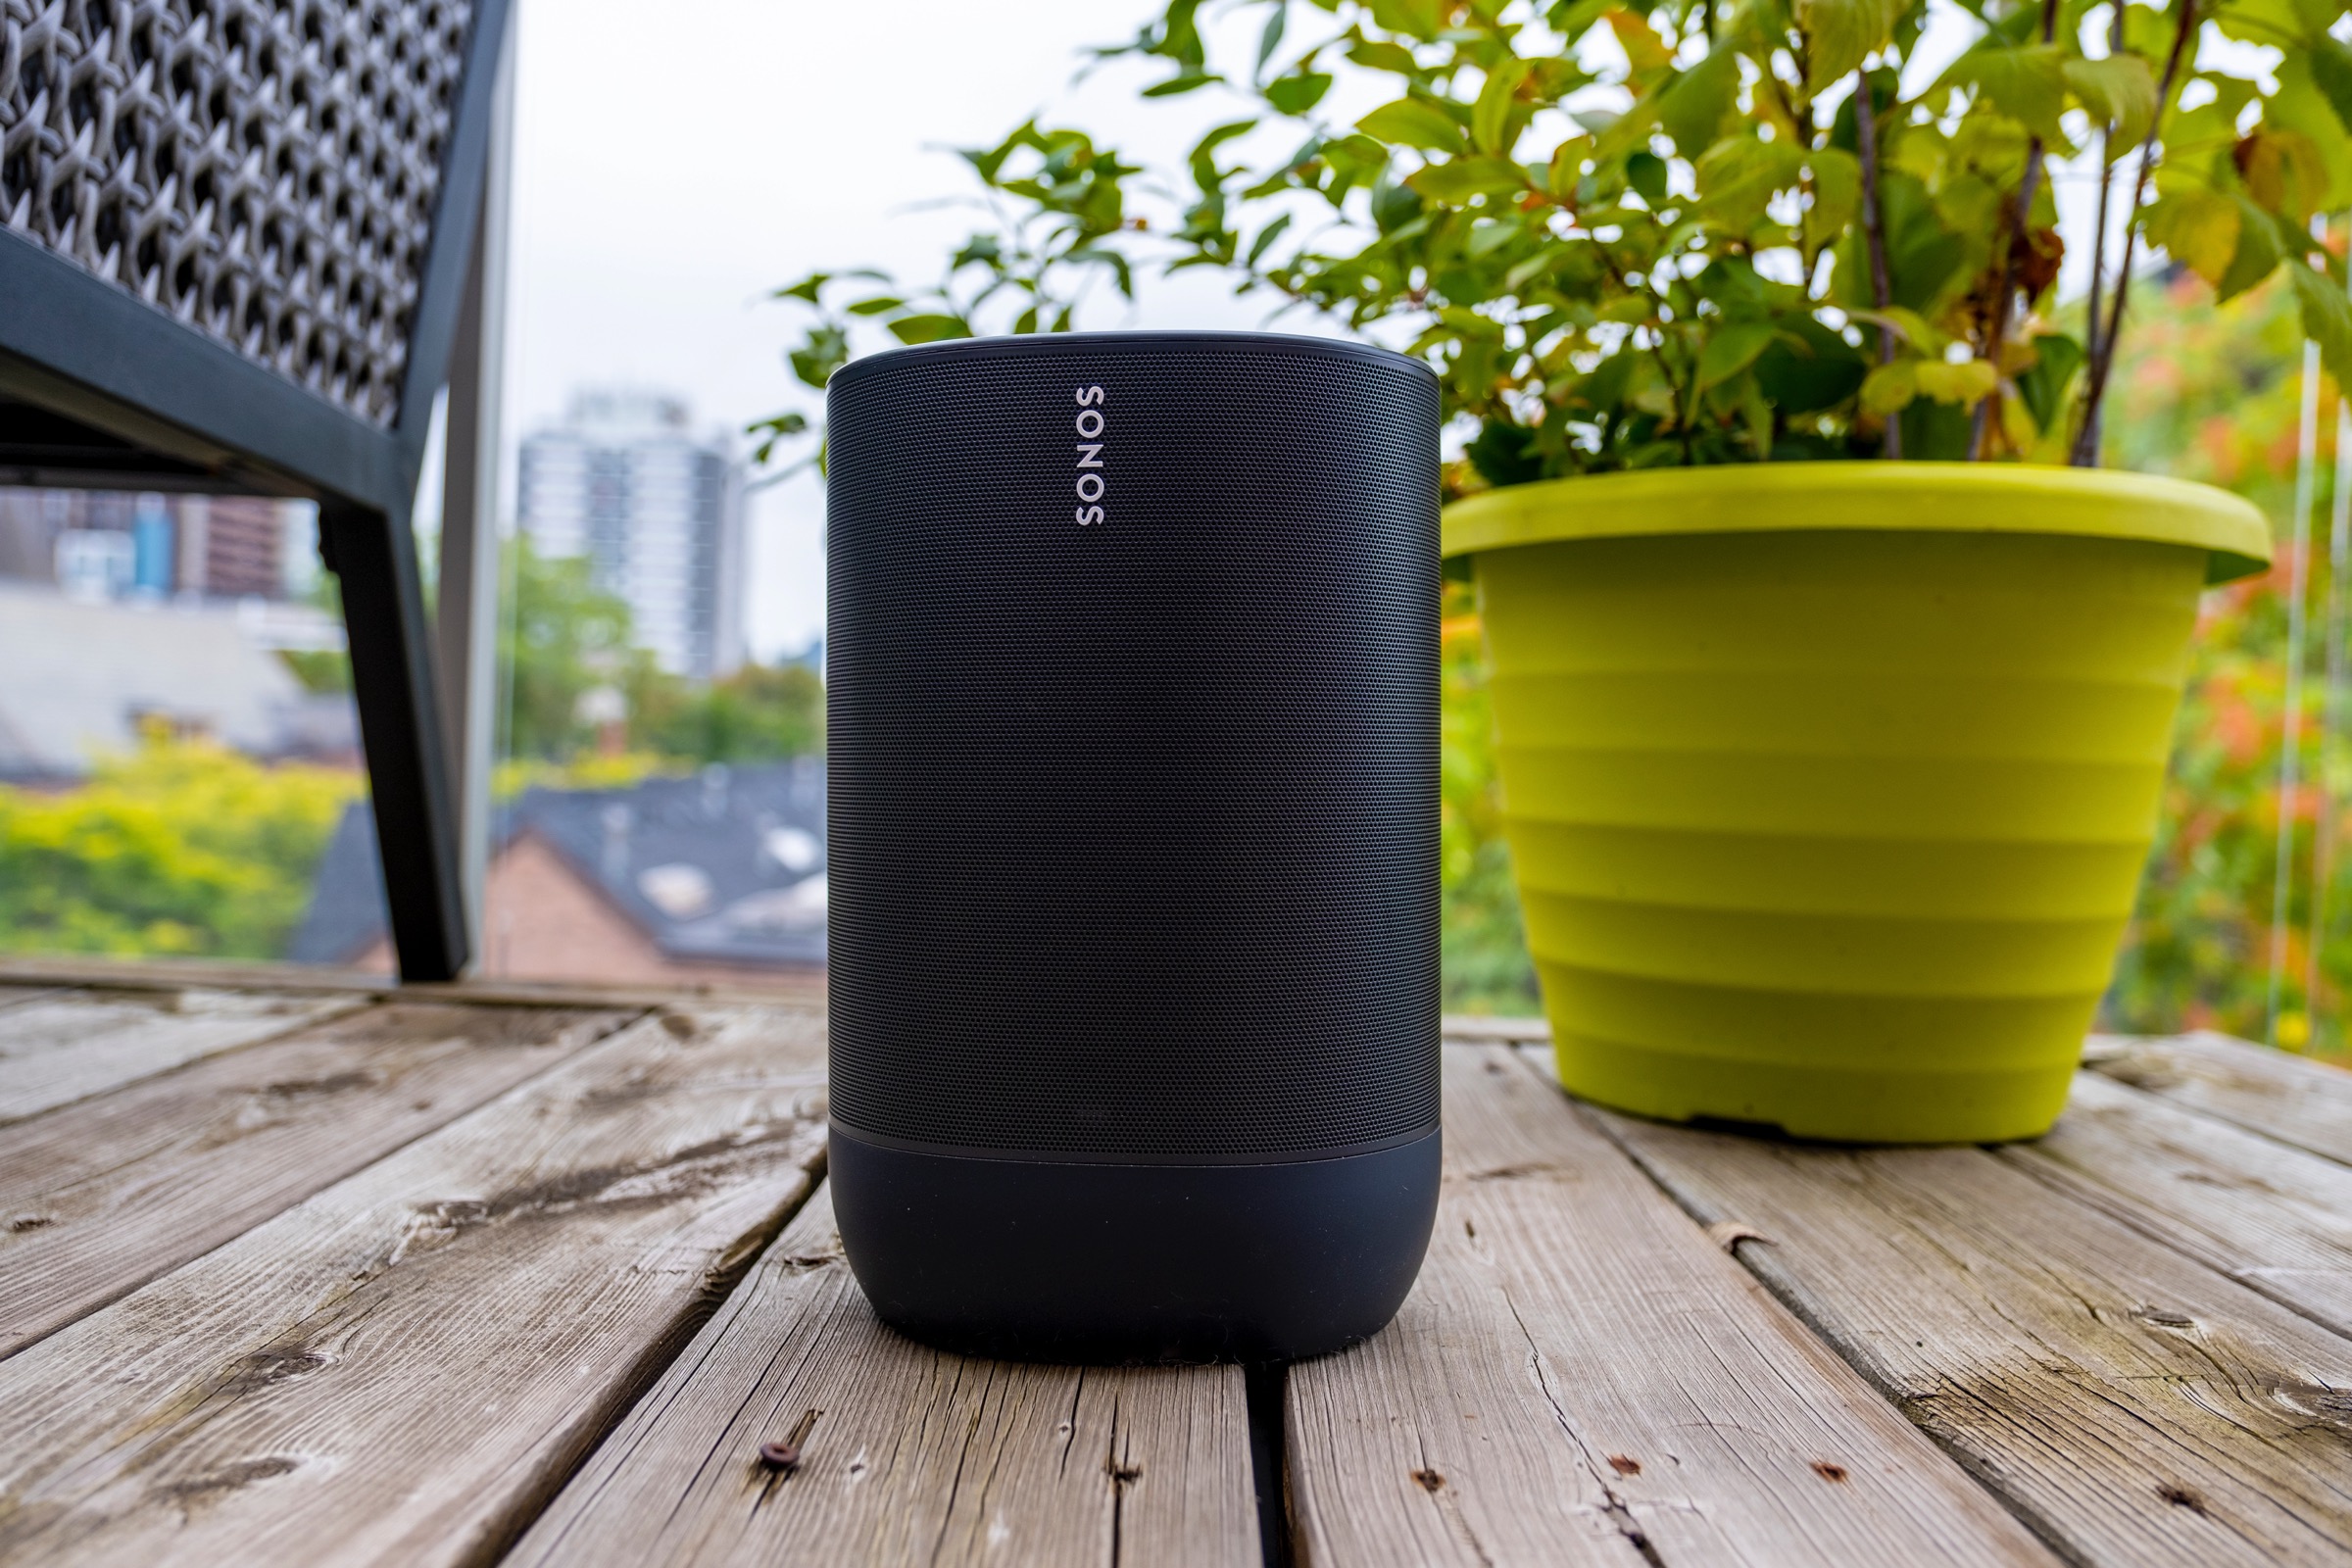 udredning telt Kabelbane The portable $399 Sonos Move is like having two great speakers in one |  TechCrunch